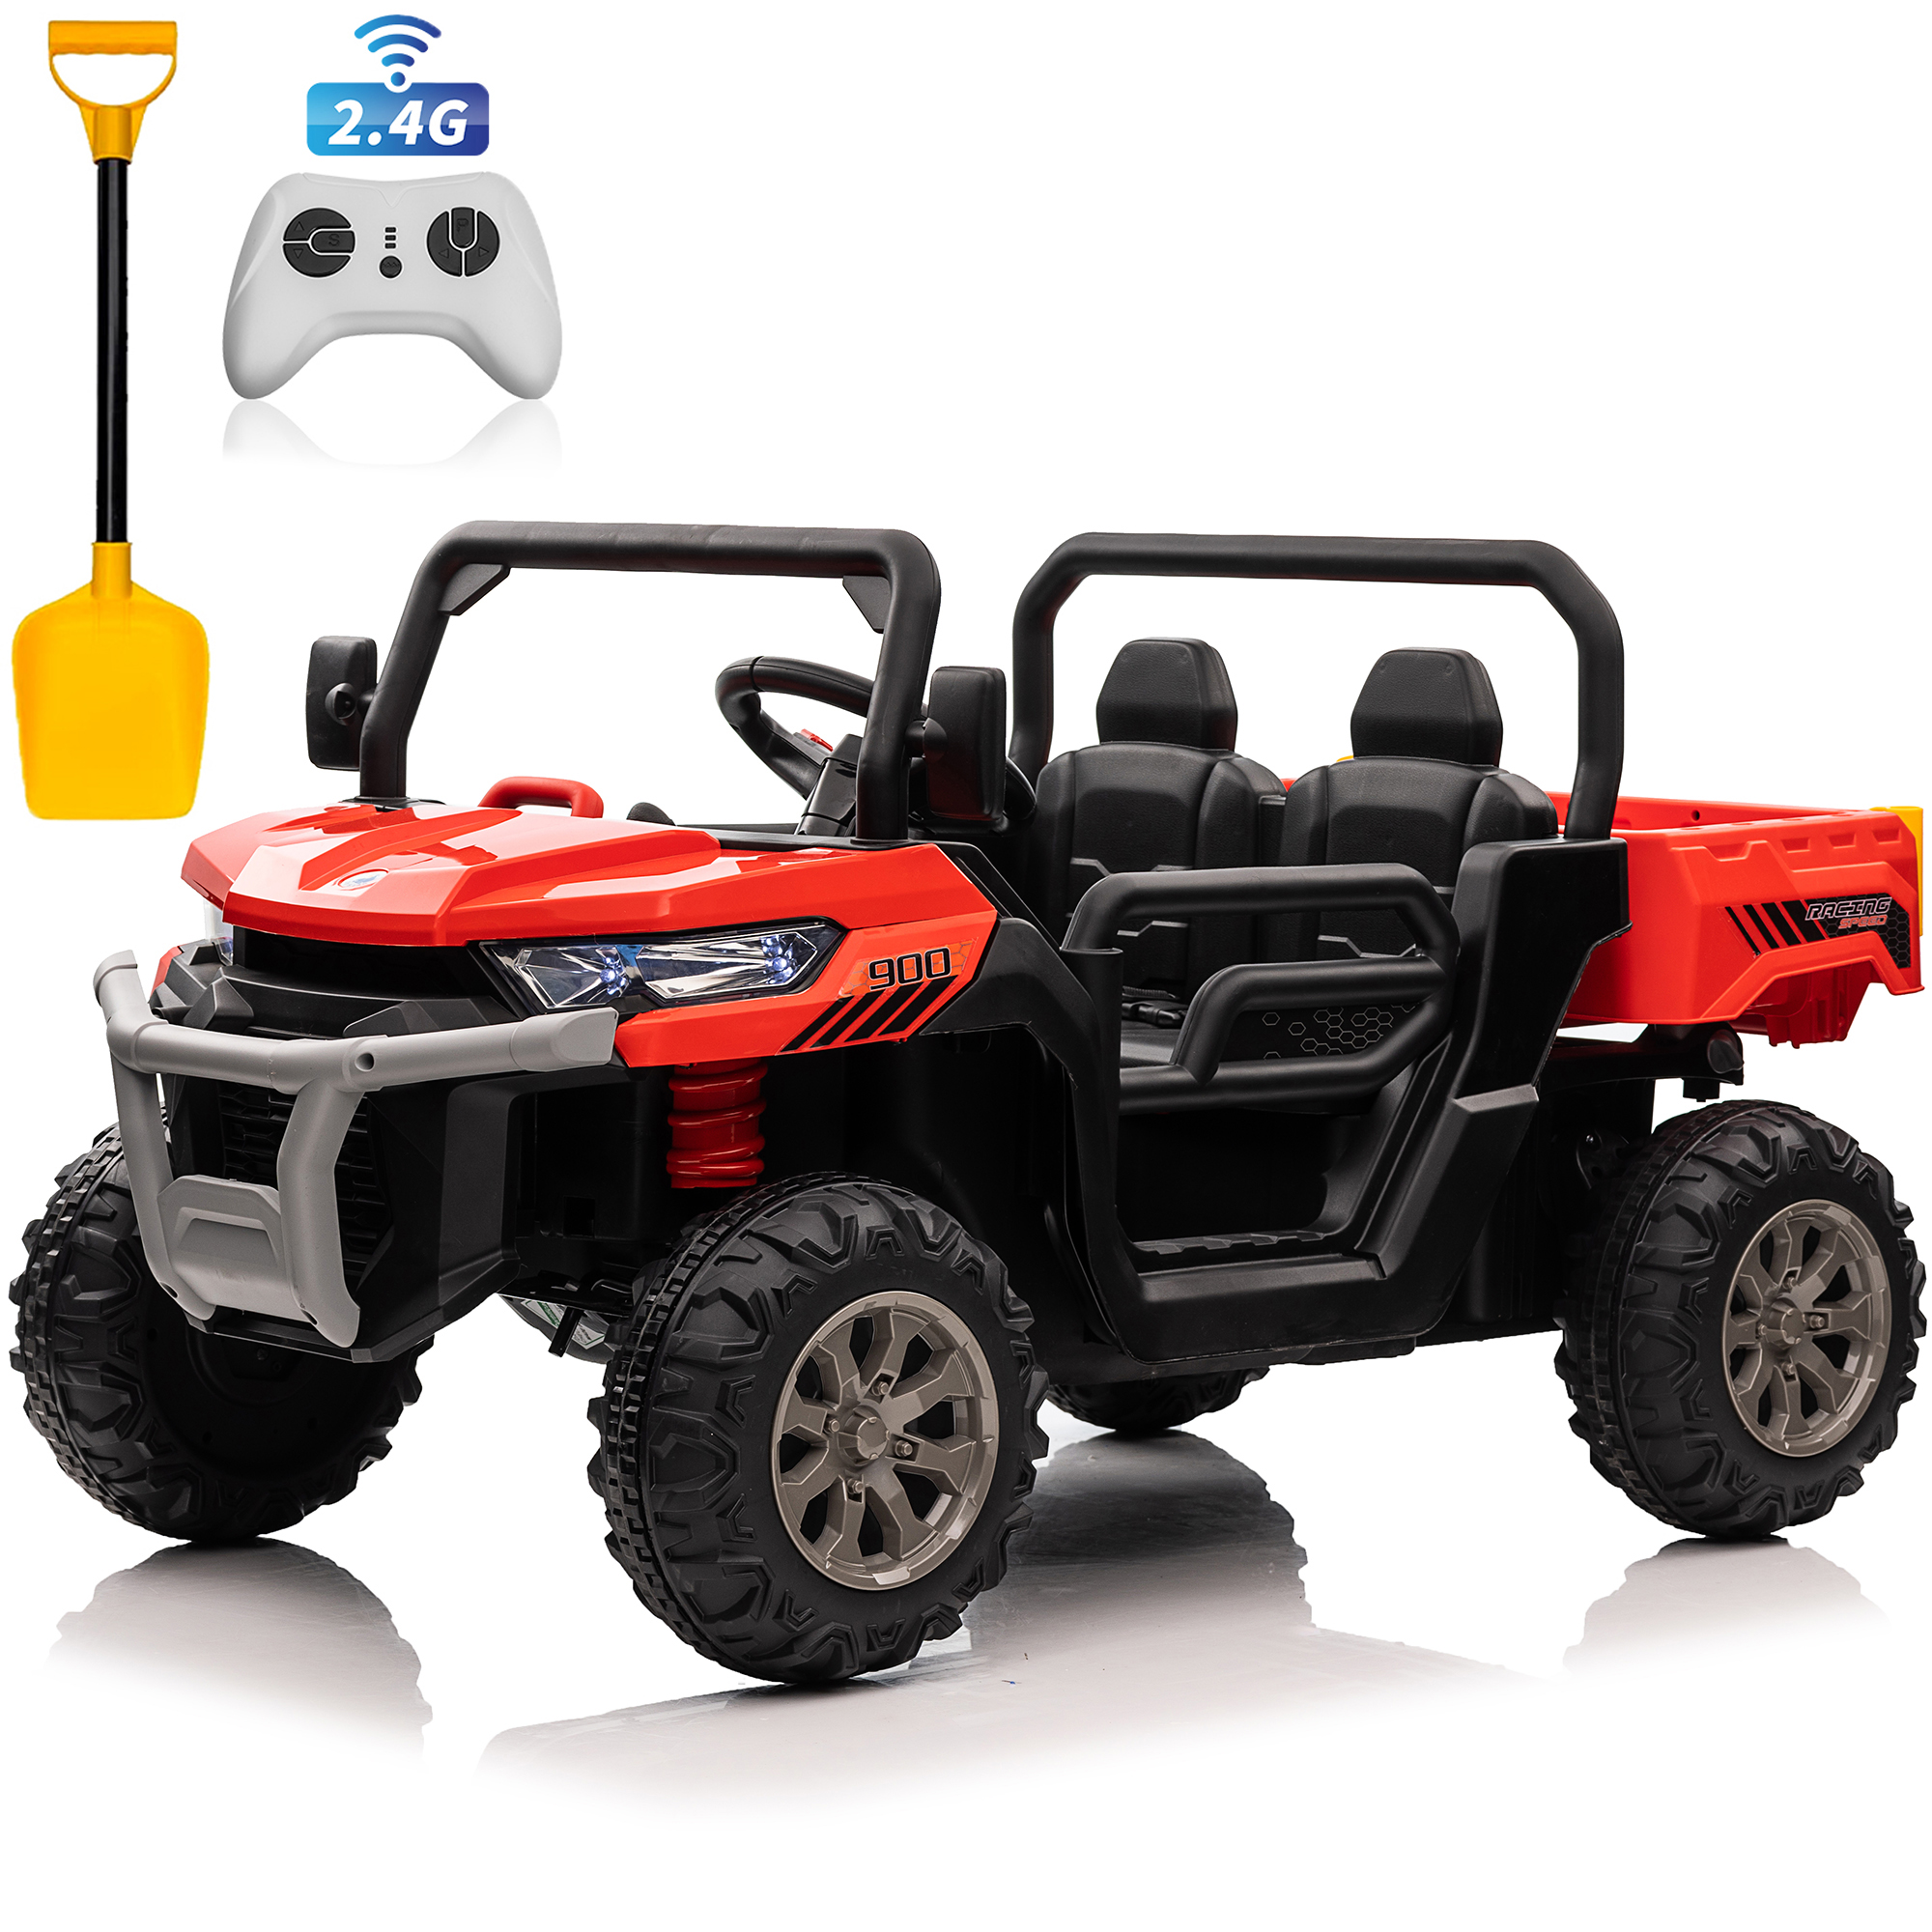 Joyracer 24V Ride on UTV with Remote Control, 2 Seater Ride on Dump Truck Car w/ 2x200W Motor, Electric Battery Powered Ride on Toys with Trailer & Shovel, Horn, MP3, Bluetooth Music for Big Kids, Red - image 1 of 15